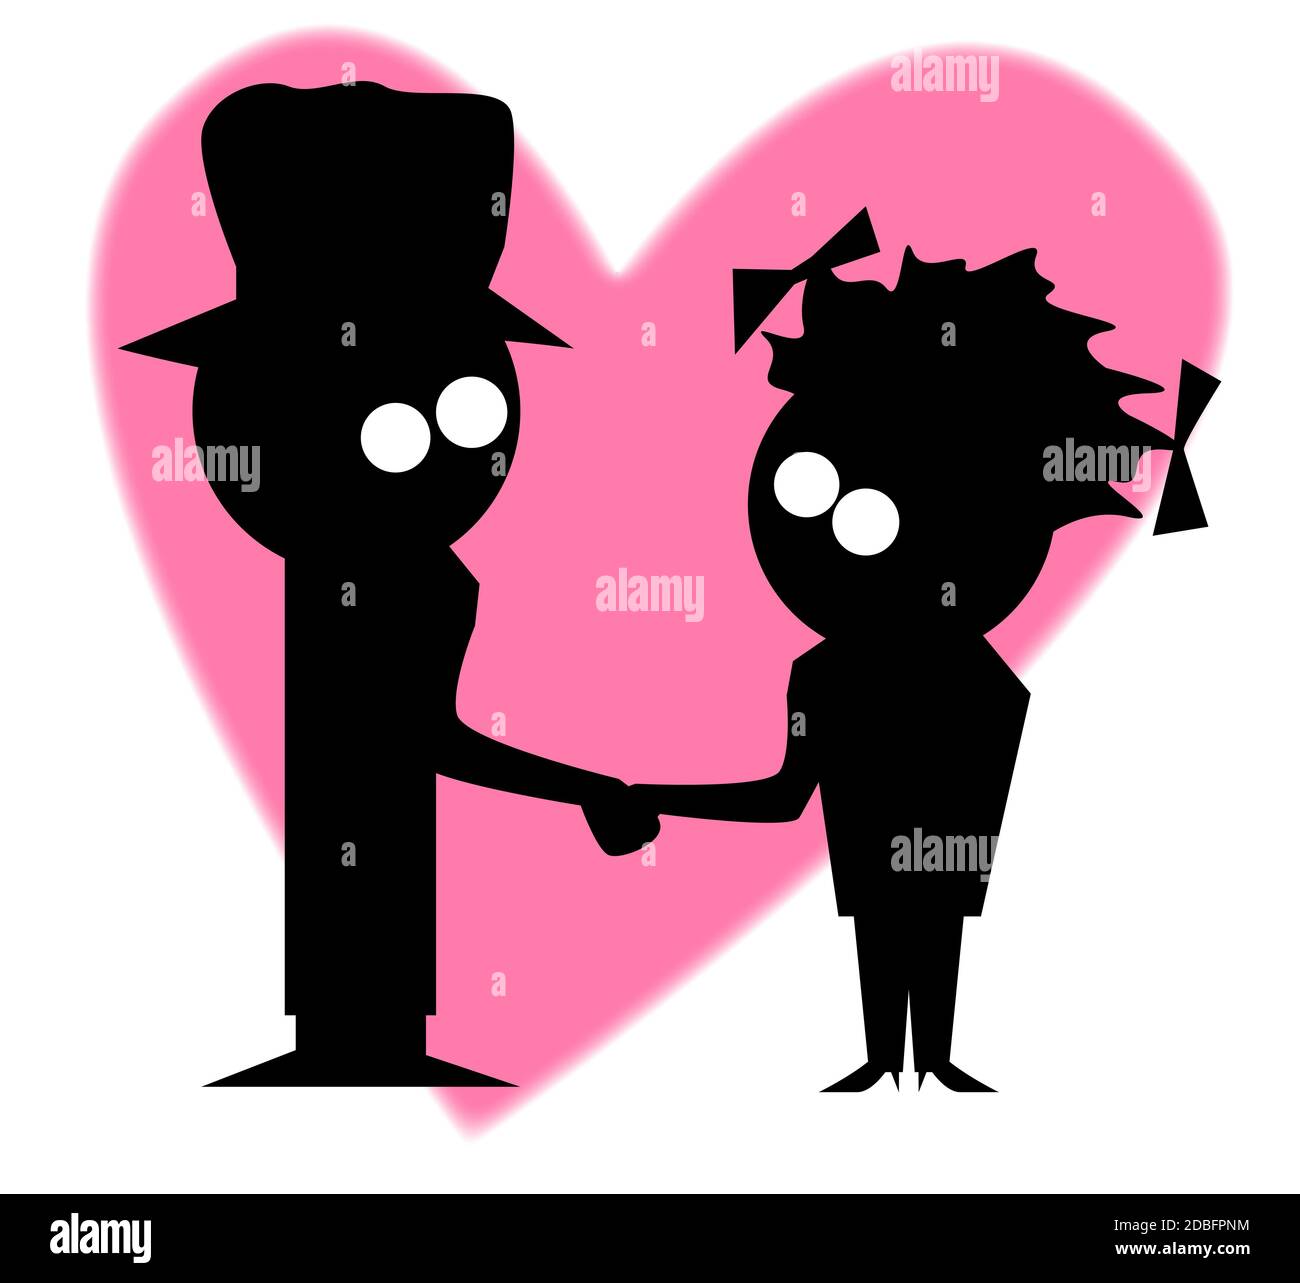 Holding hands silhouette cartoon Cut Out Stock Images & Pictures - Alamy